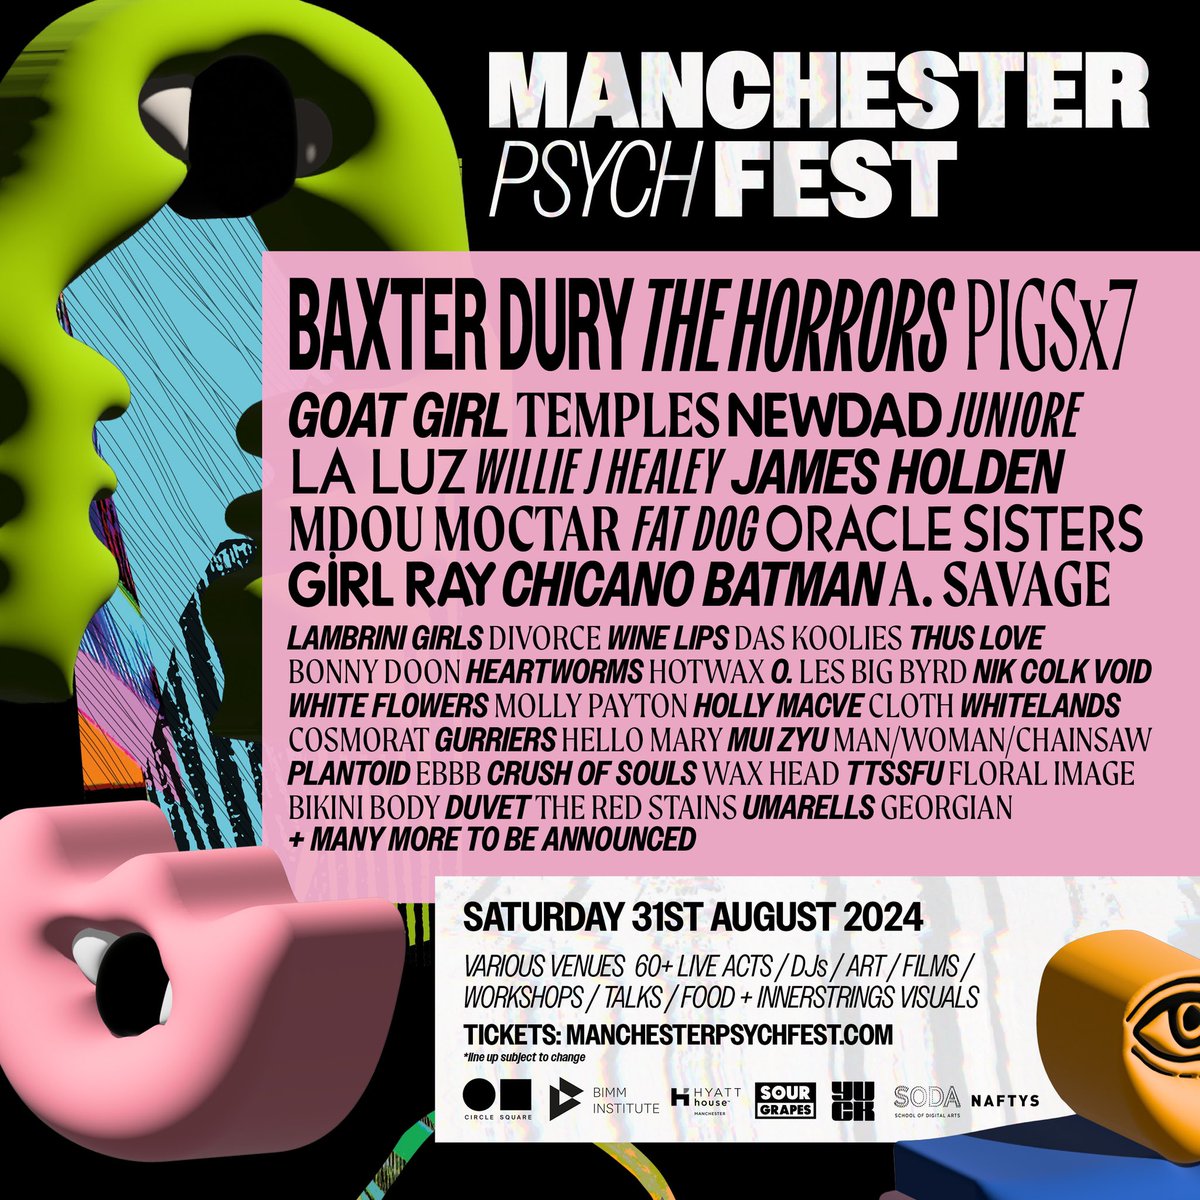 Ooooh this is gonna be a good one 🤩 V excited to be returning to Manchester for @mancpsychfest on Sat 31st August! Last time we played in Manchester we felt a whole lotta love in the room so looking forward to hoofing it down the M6 for a triumphant return. Tickets in bio x